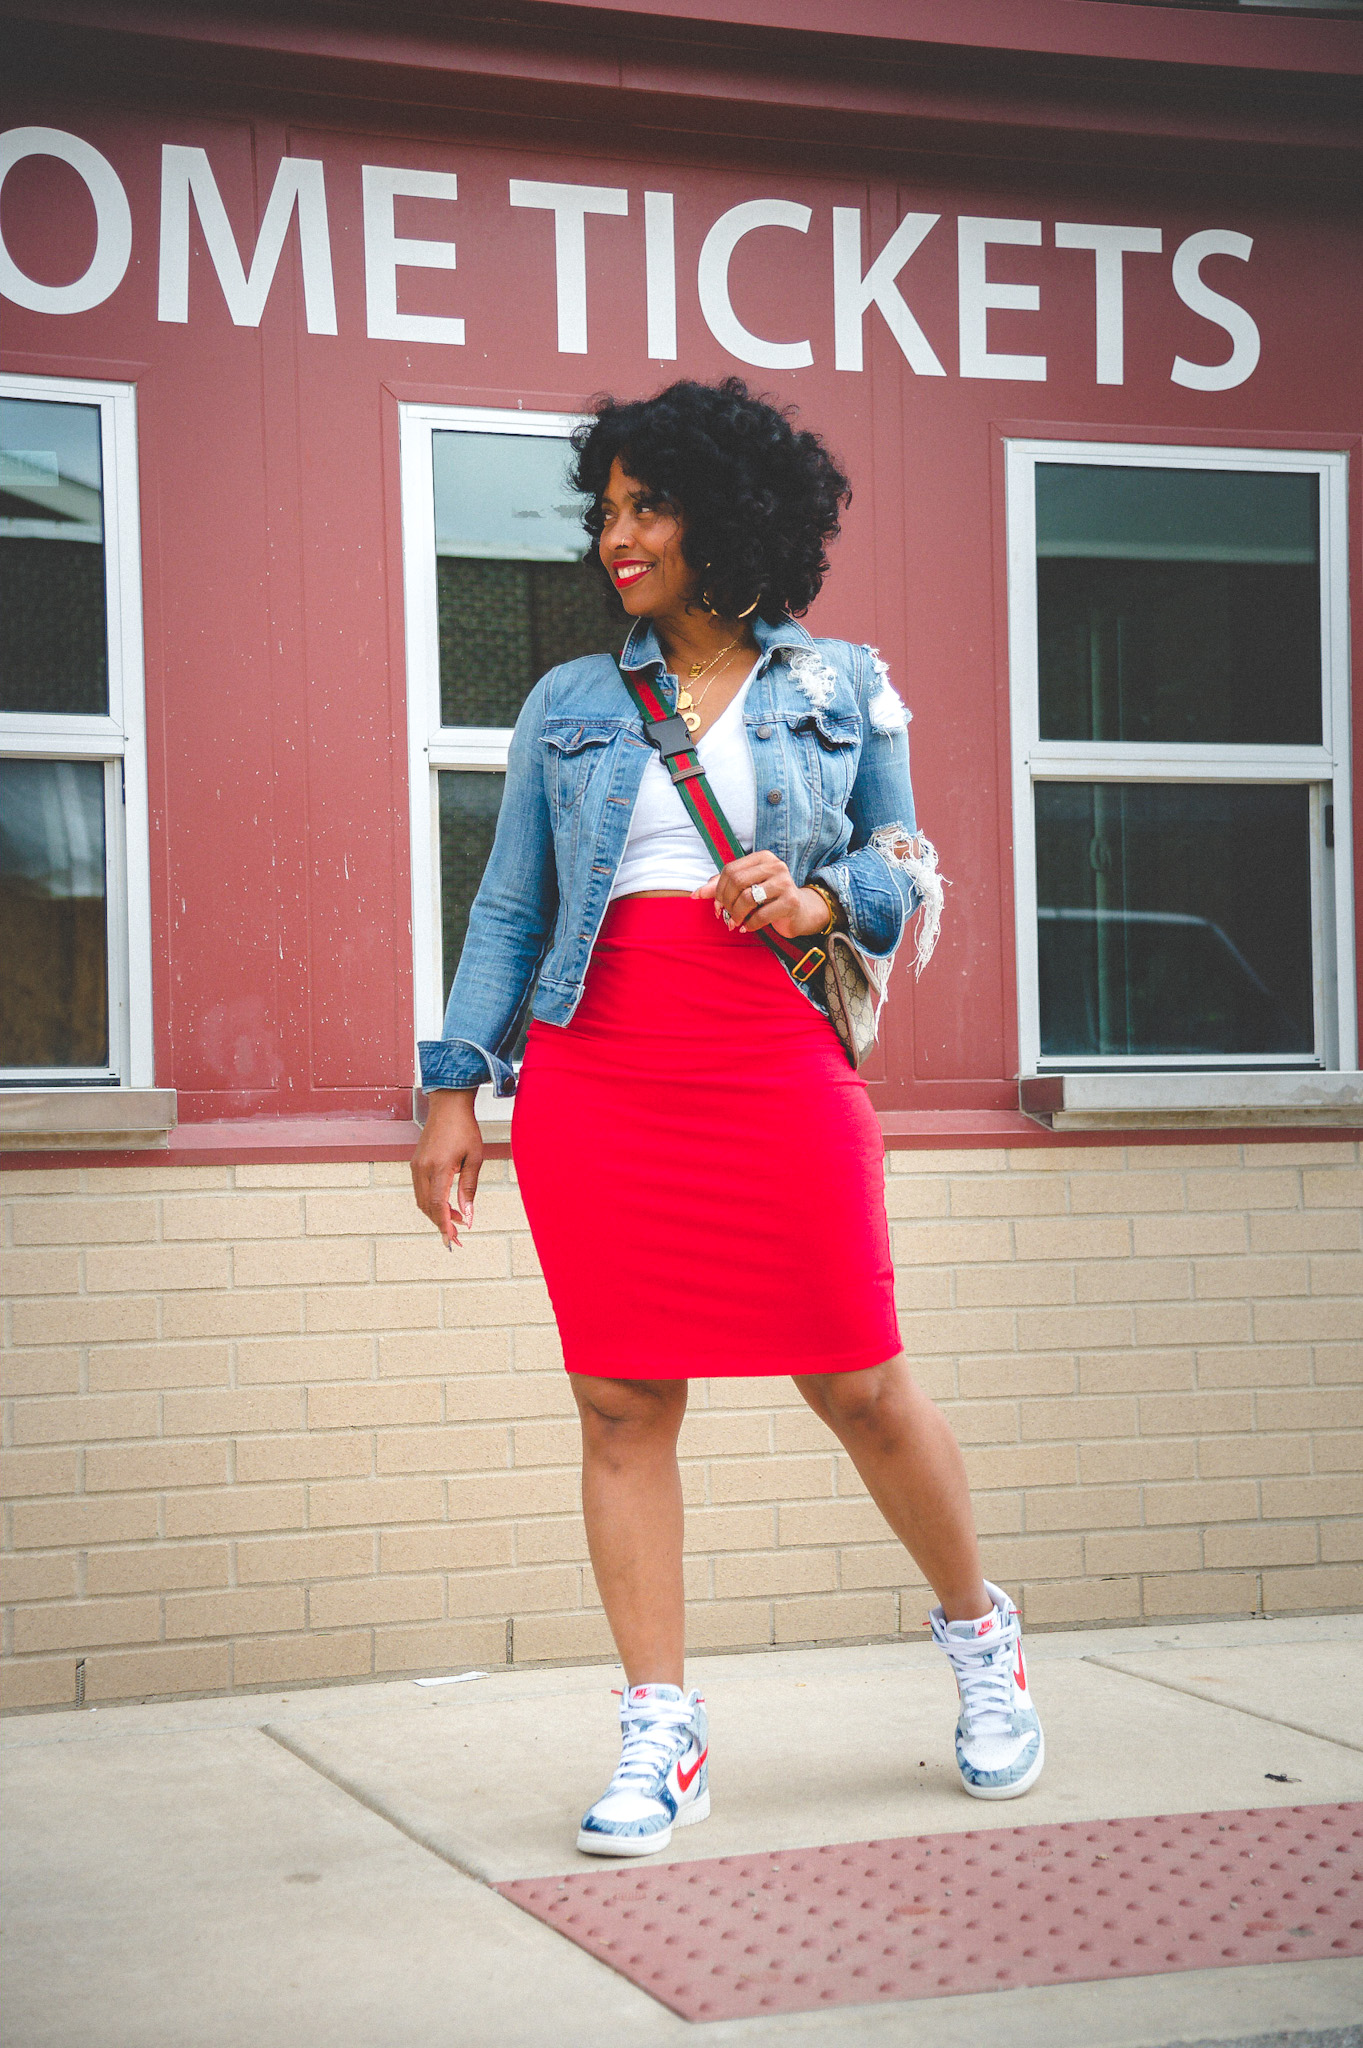 HBCU HOMECOMING OUTFIT IDEA USING
ITEMS YOU HAVE IN YOUR CLOSET,
COLLEGIATE STYLE INSPO, CASUAL
HOMECOMING OUTFITS, DELTA SIGMA
THETA OUTFIT IDEA, SPELMAN COLLEGE.
HOWARD UNIVERSITY, SPORTY GIRL
AESTHETIC, WHAT TO WEAR TO HBCU HOMECOMING, HOW TO WEAR LEGGINGS TO HOMECOMING, GAME DAY OUTFIT, HBCU FASHION
